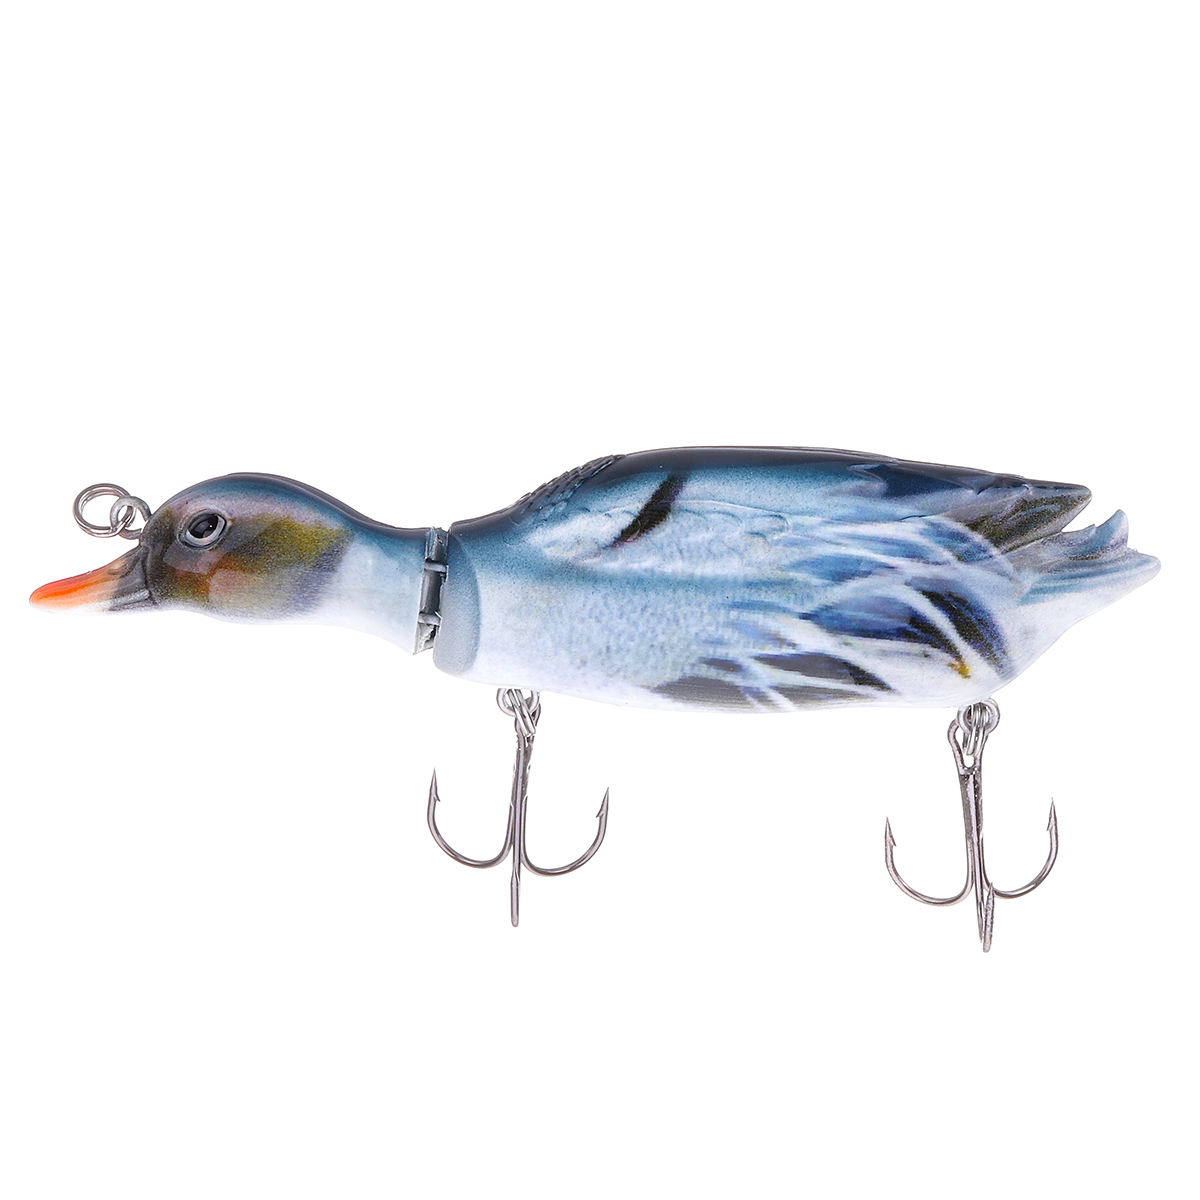 1PC-ZANLURE-5-13CM-59g-3D-Duck-Artificial-Fishing-Lure-With-Hooks--Hard-Baits-Minnow-Topwater-Wobble-1646056-7